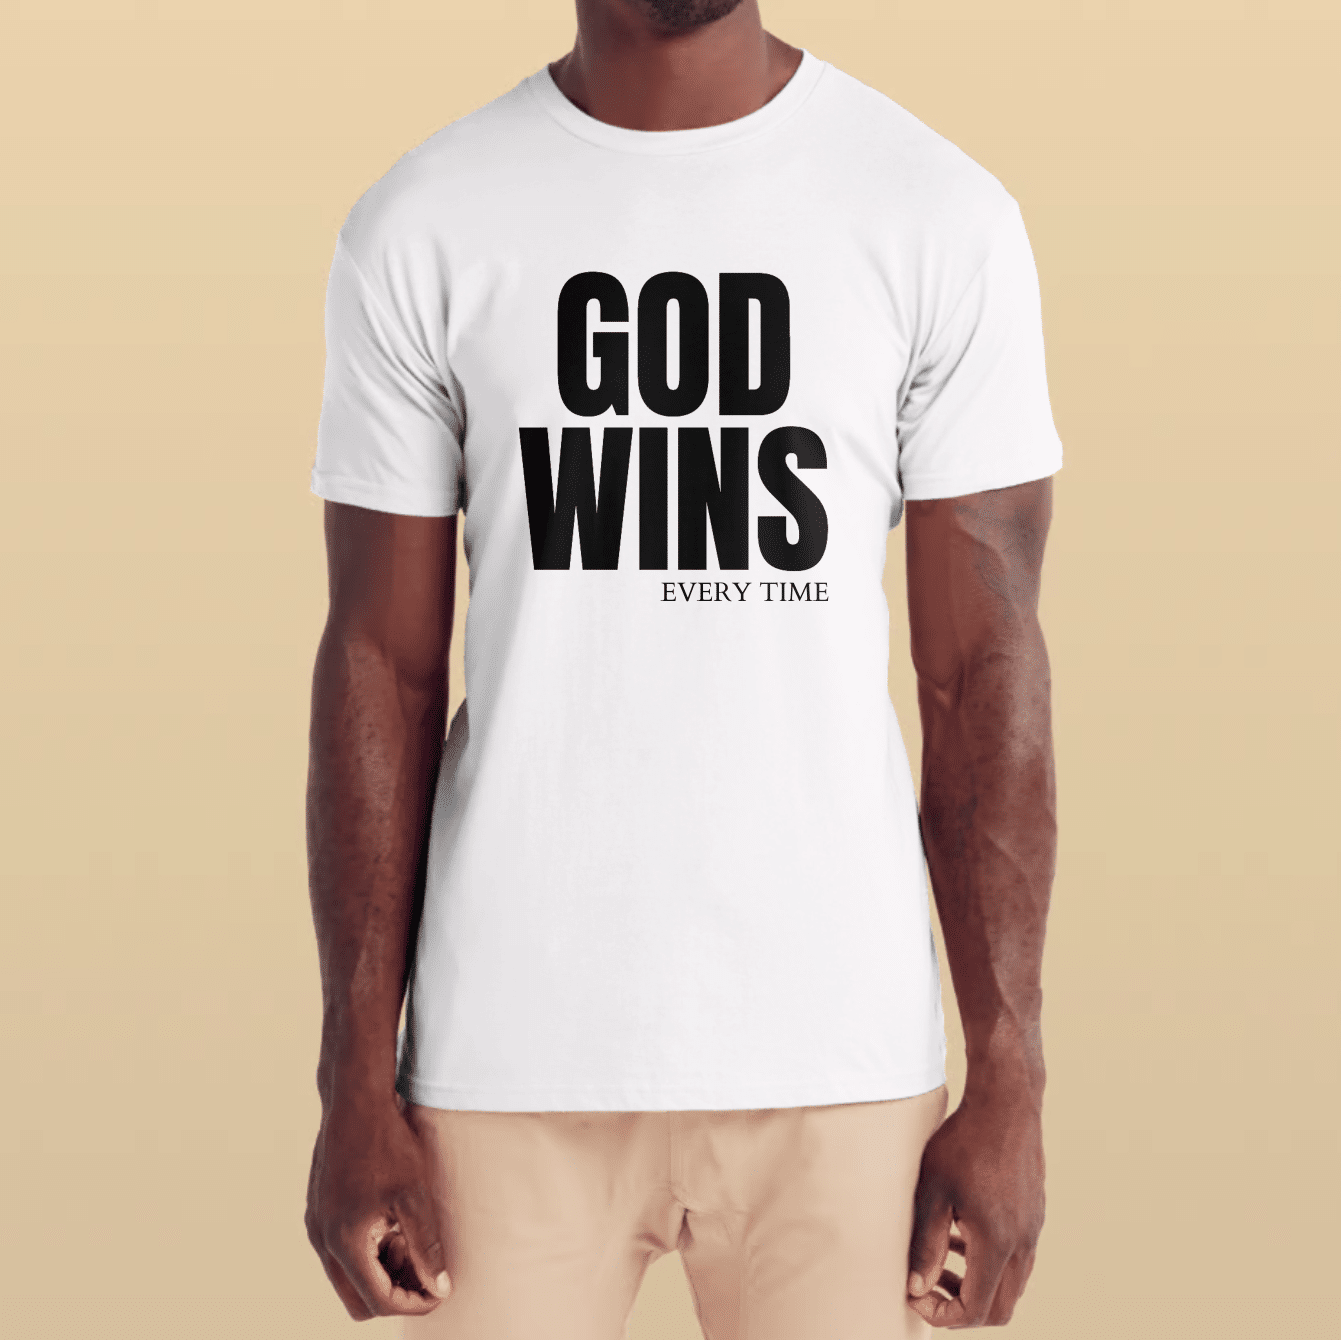 God wins every time shirt available at Little Big Things Christian Book Store